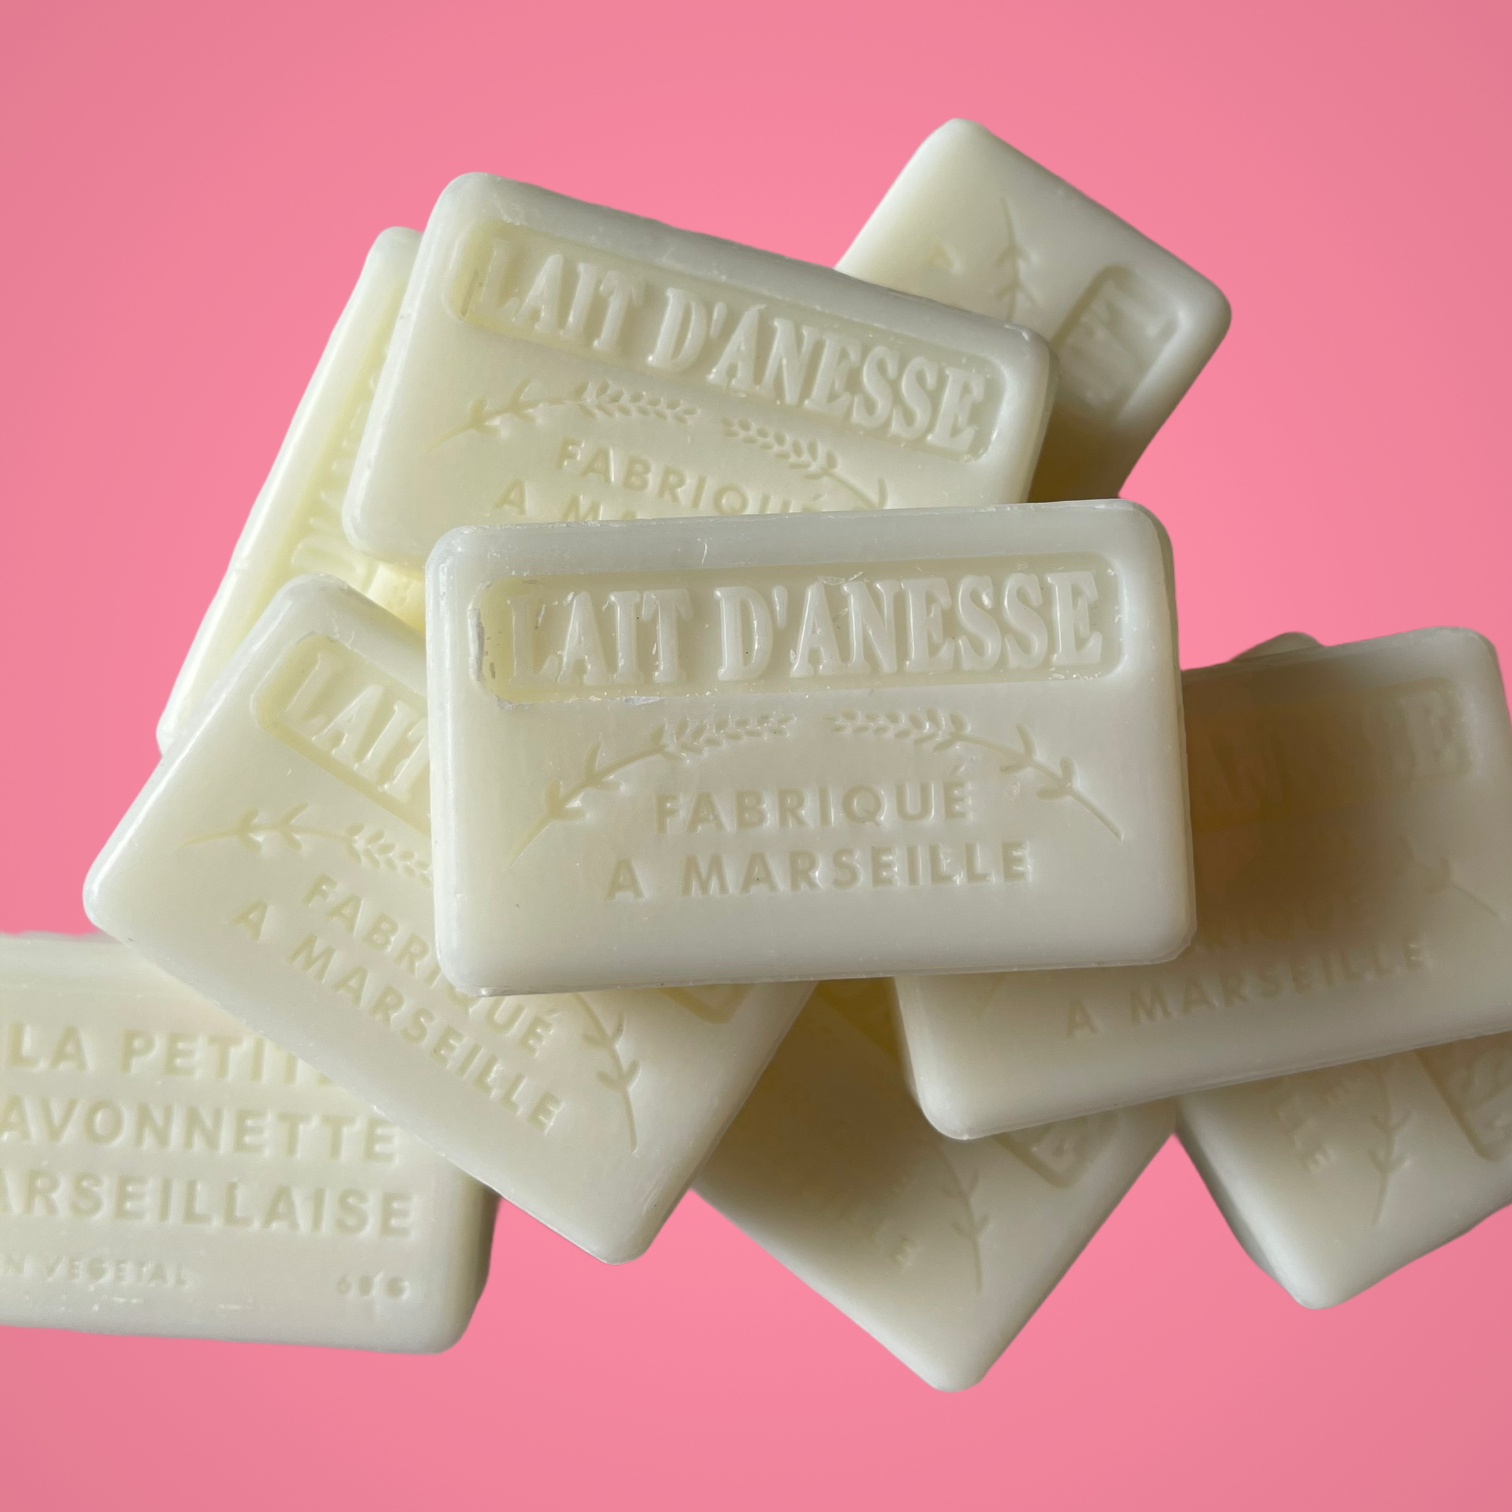 lait d'anesse french guest soap